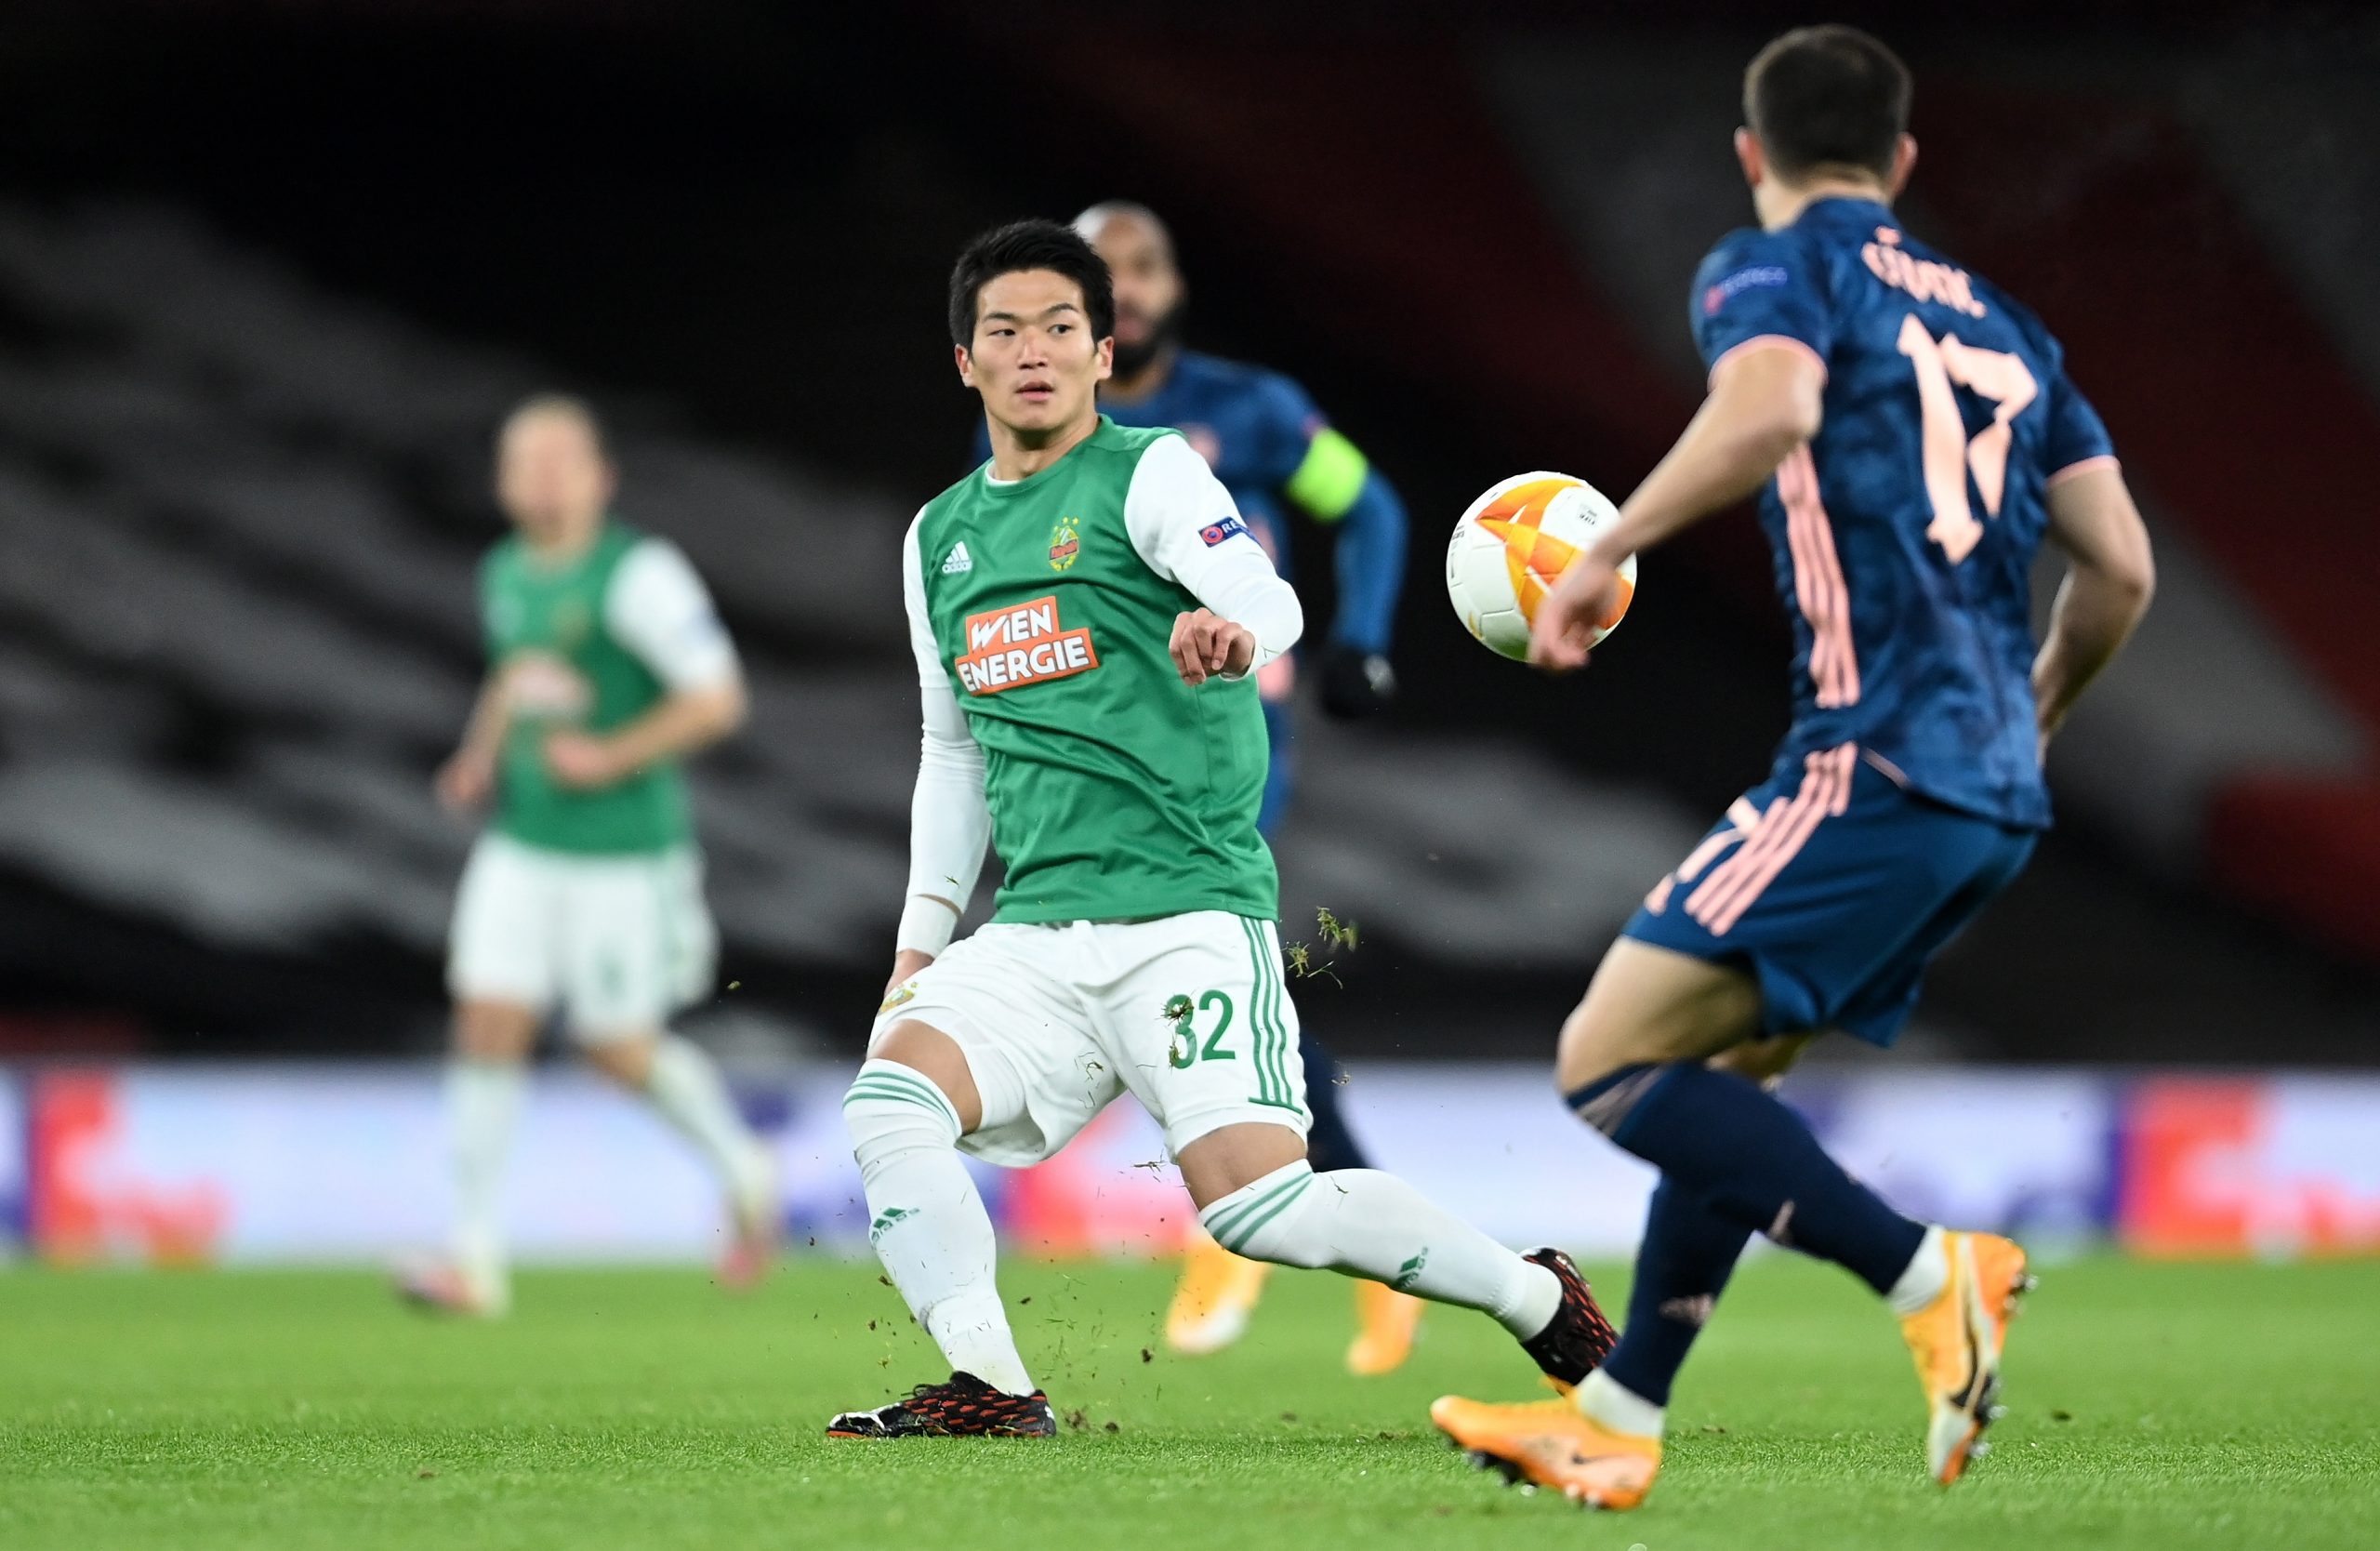 epa08860478 Rapid Vienna's Kohya Kitagawa (L) in action against Arsenal's Cedric (R) during the UEFA Europa League group B soccer match between Arsenal and Rapid Vienna in London, Britain, 03 December 2020.  EPA/NEIL HALL